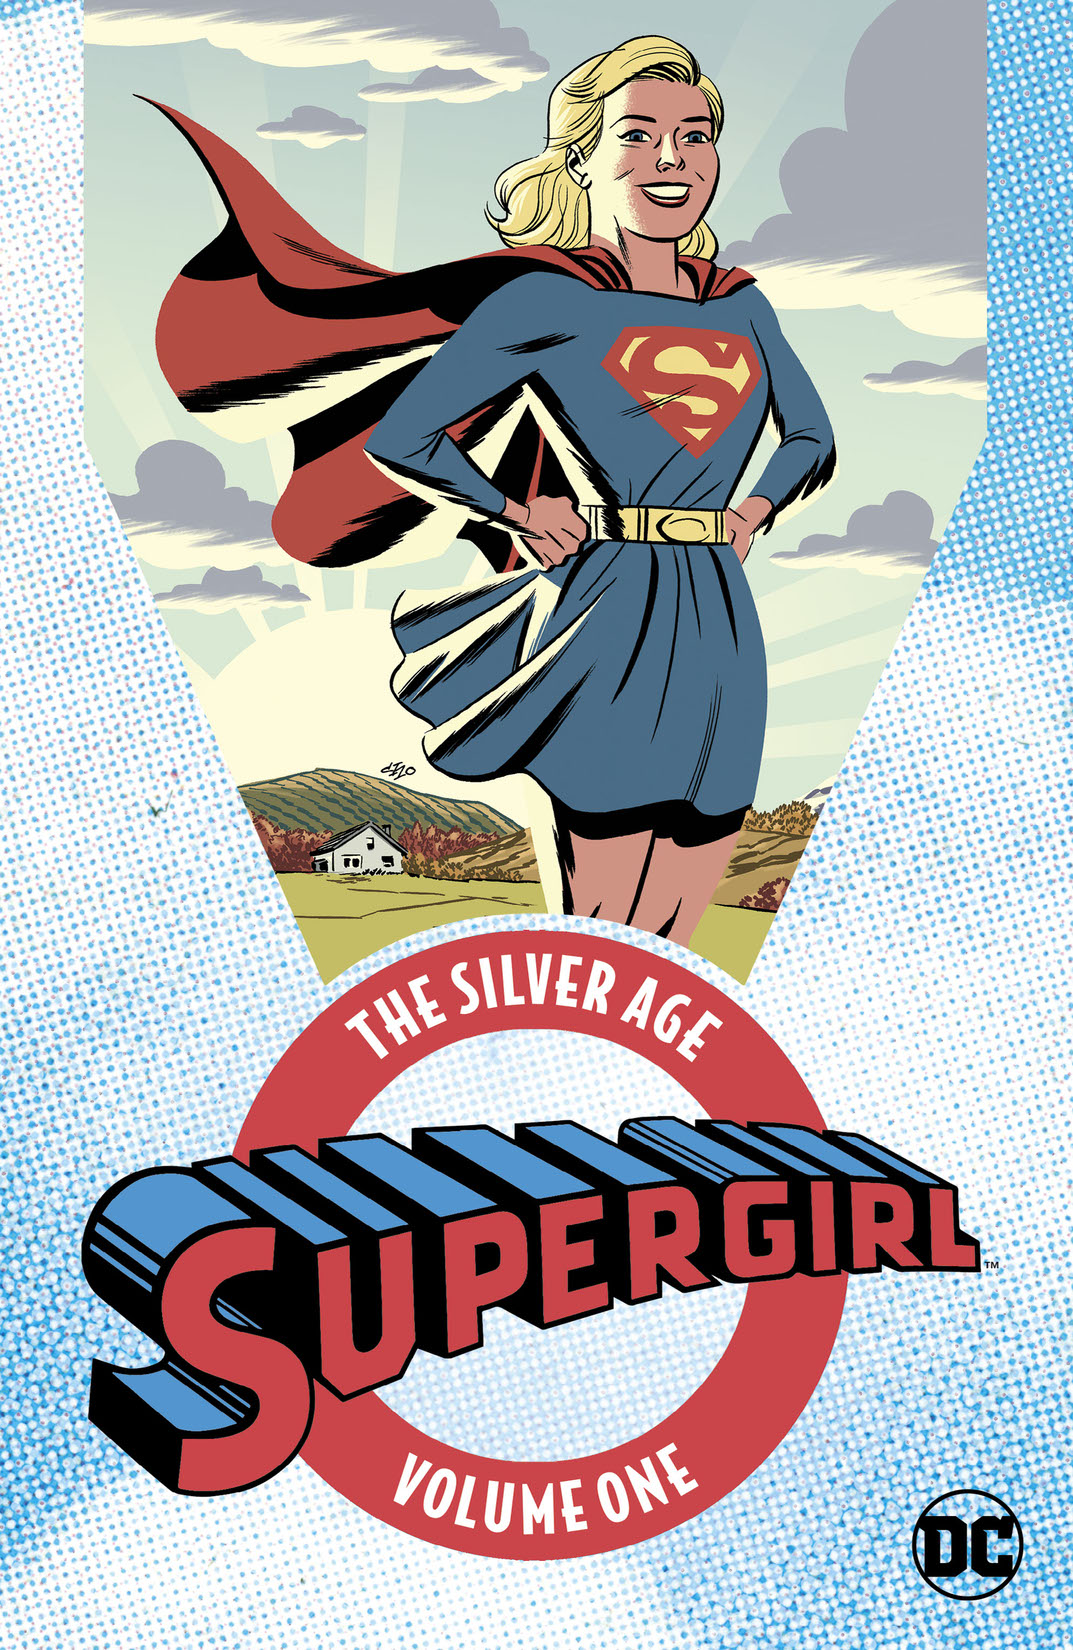 Supergirl: The Silver Age Vol. 1 preview images